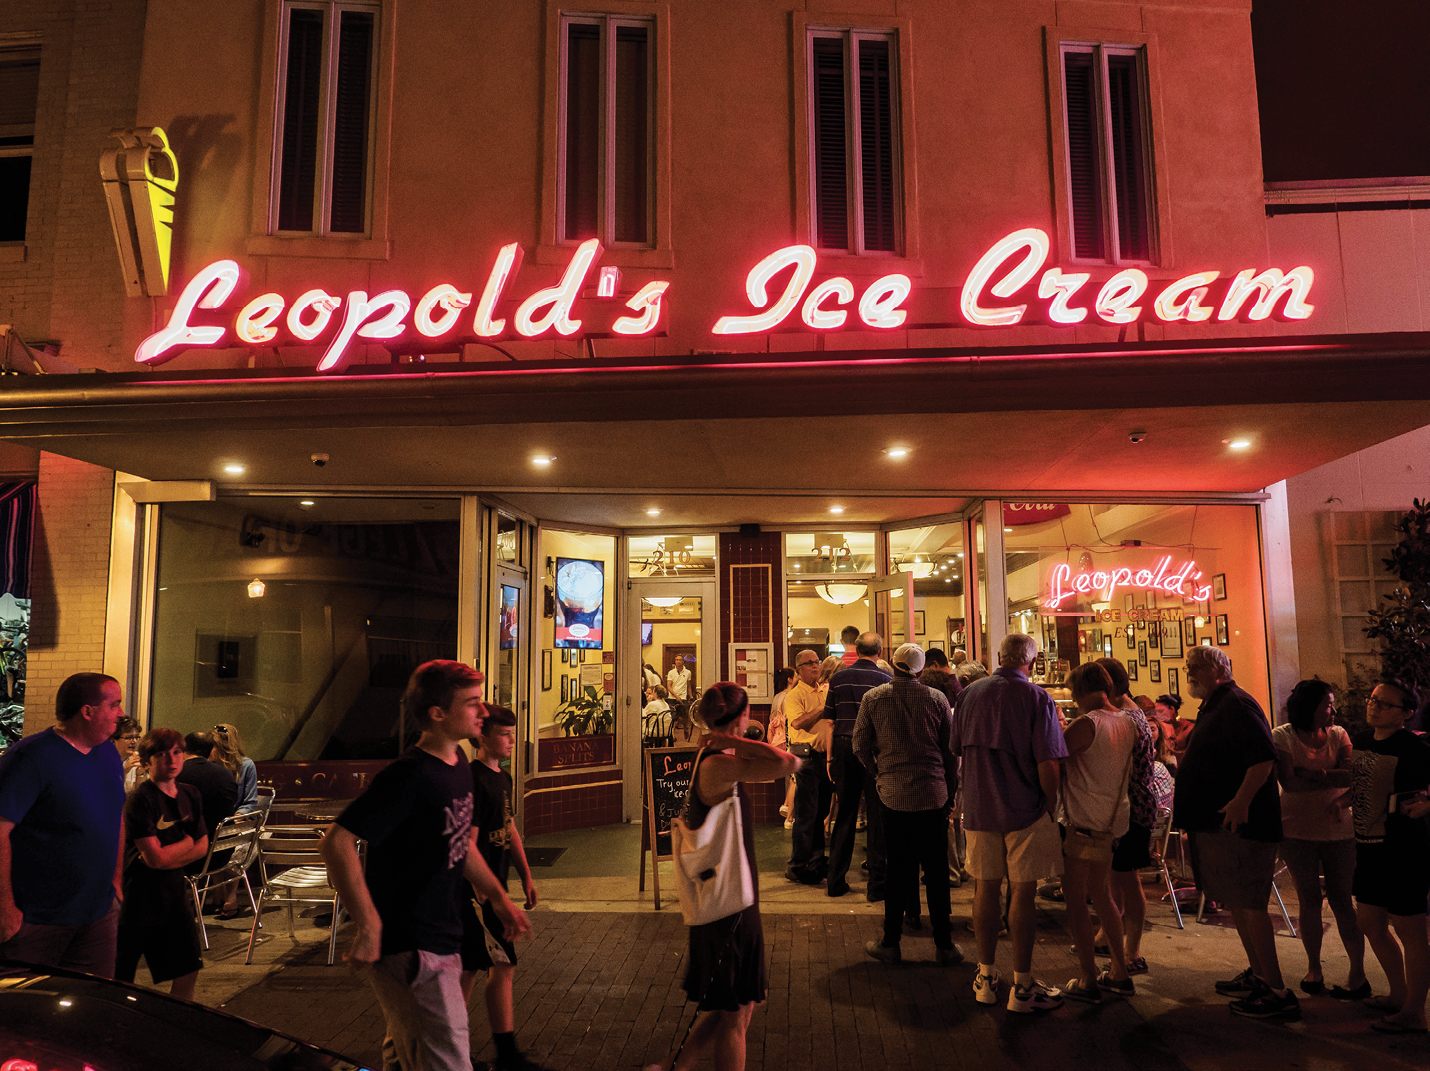 The after-dinner crowd queues up at Leopold’s Ice Cream, which was established 98 years ago and stays open until midnight on weekends.